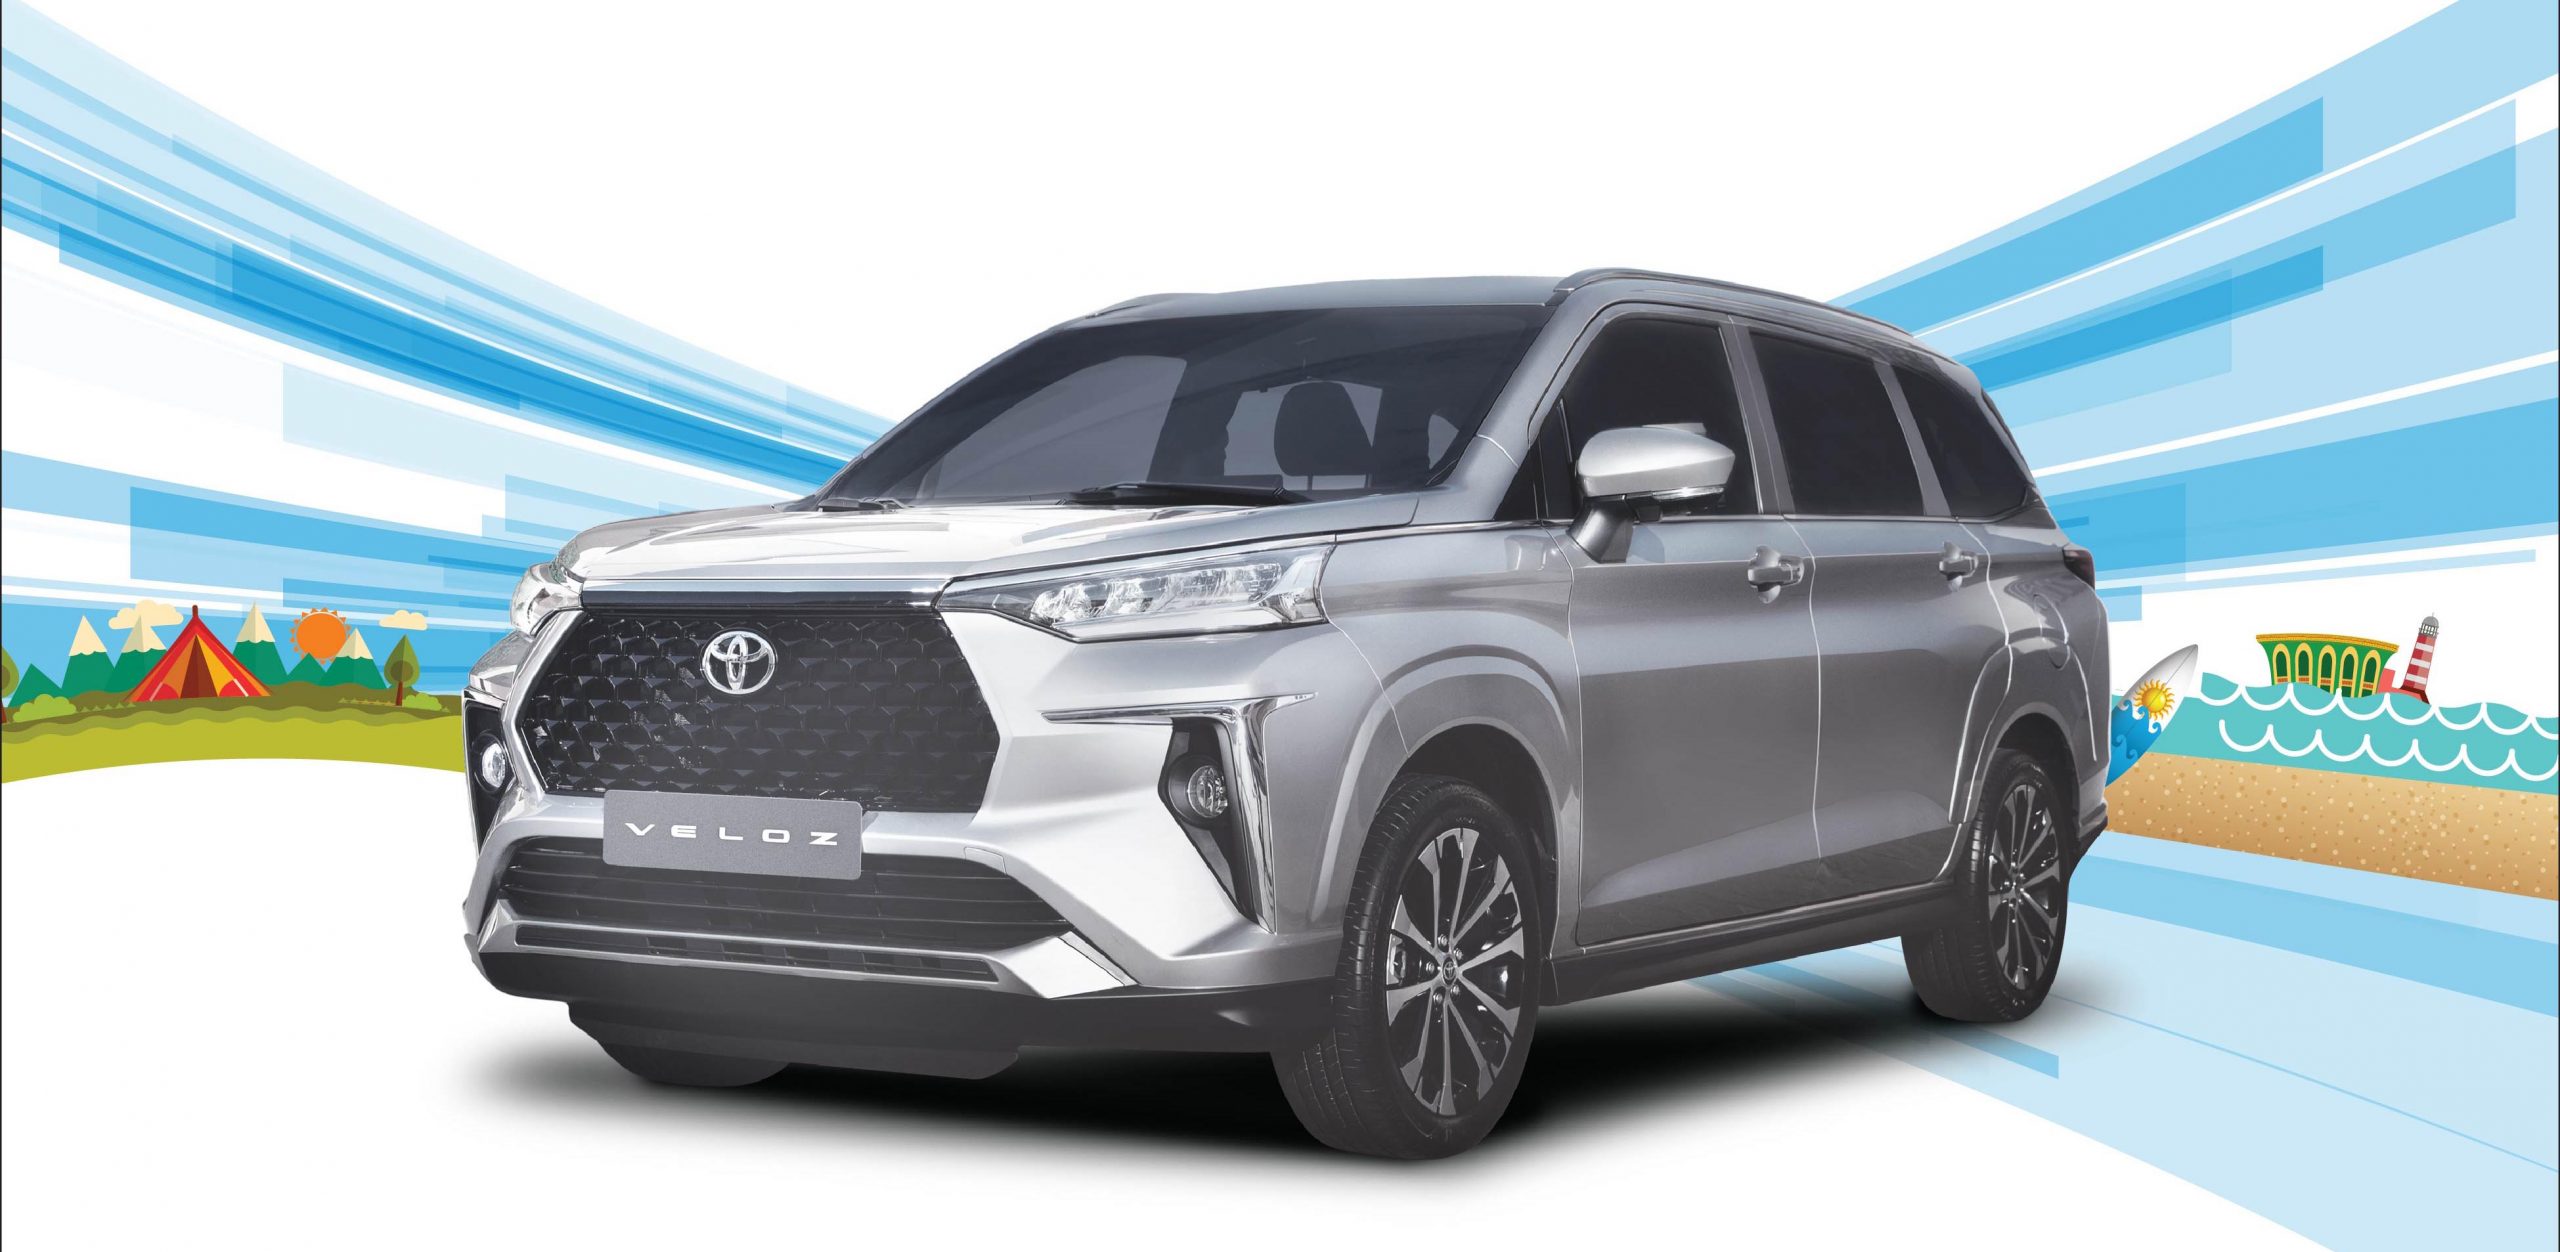 Toyota Launches All-New Fun Family Crossover SUV – ‘Veloz’ in Oman